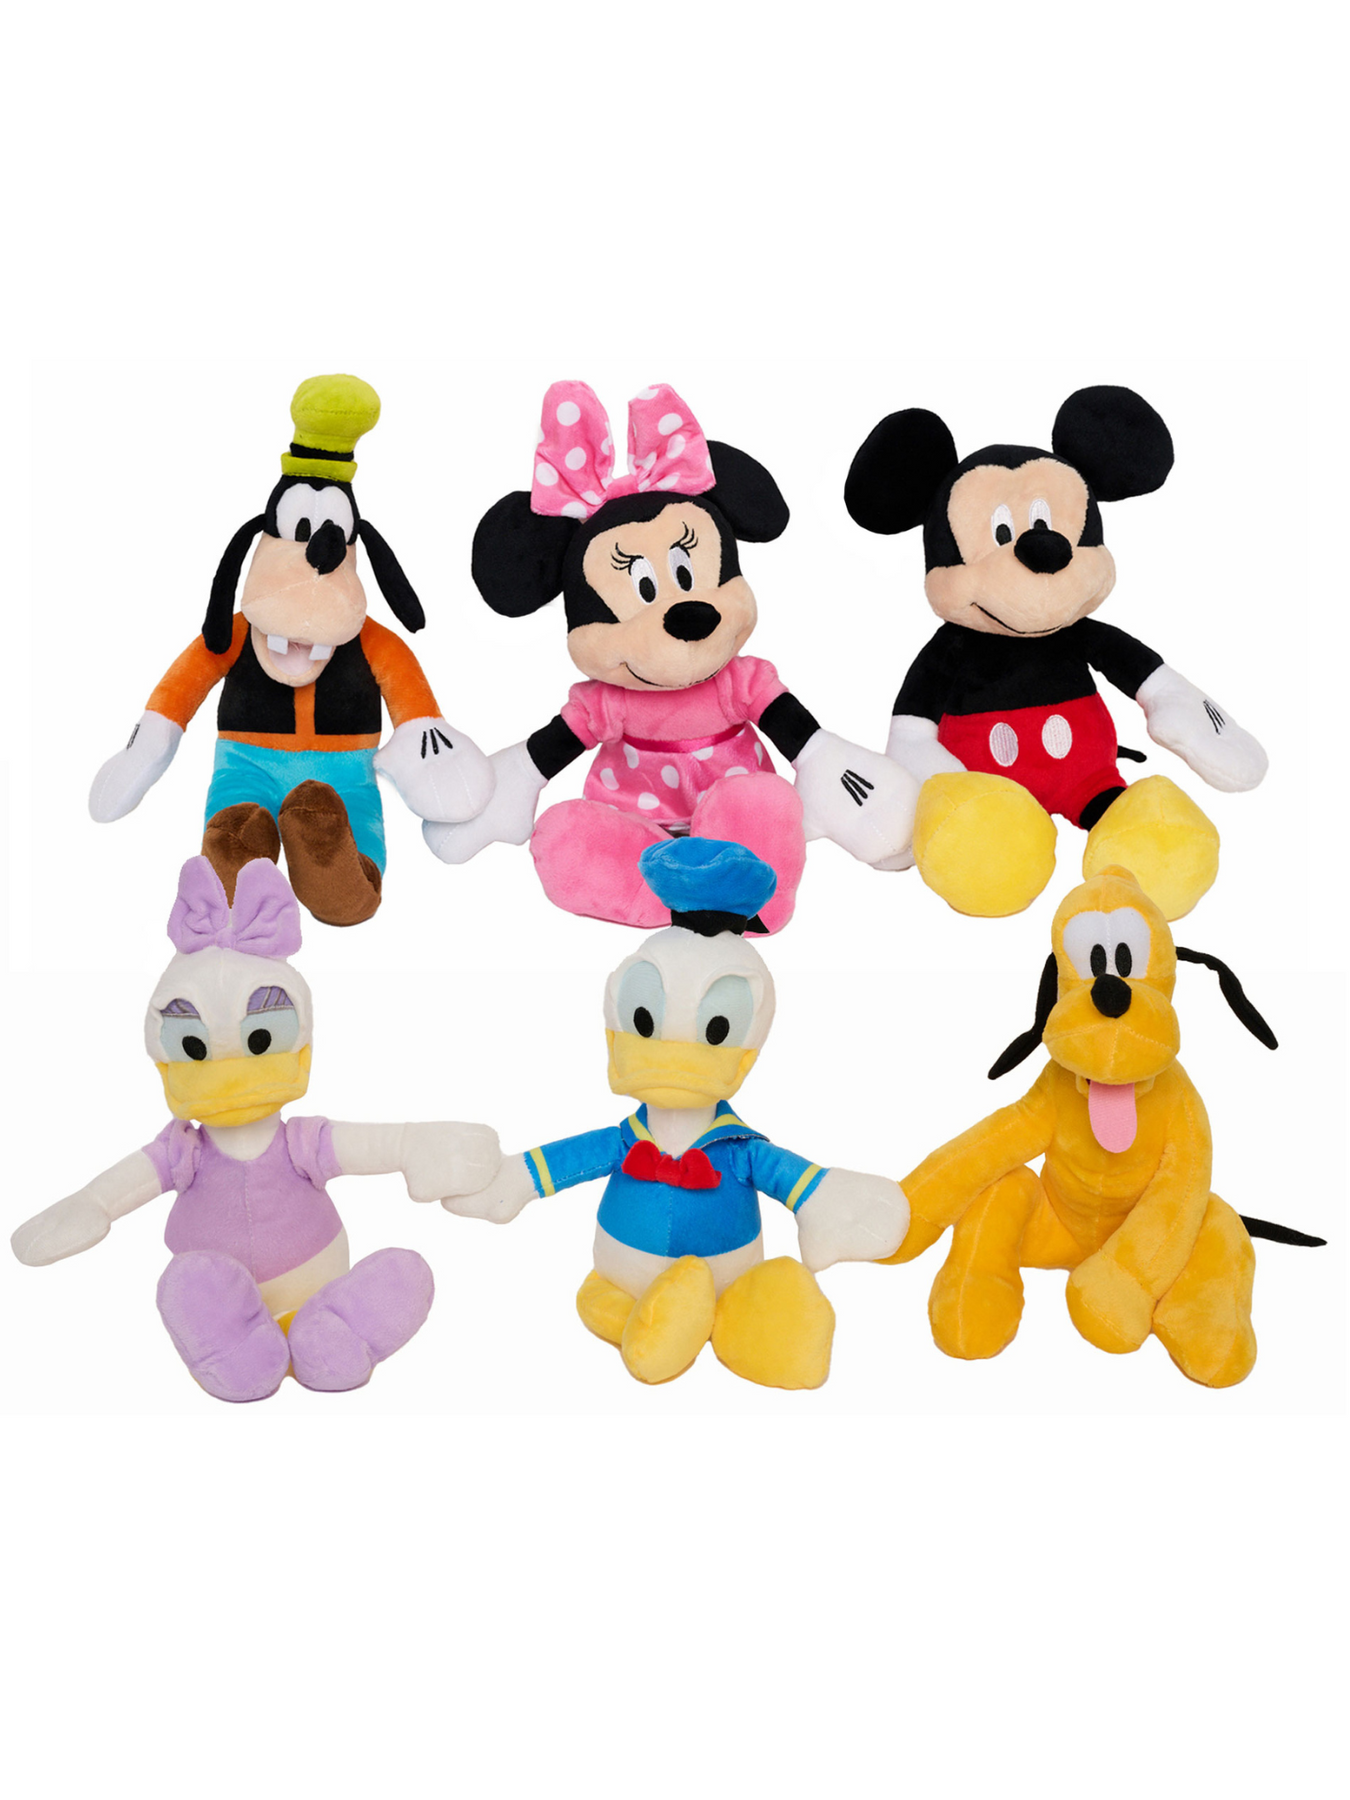 MICKEY MOUSE AND FRIENDS © DISNEY 100TH ANNIVERSARY PLUSH PANTS - Black